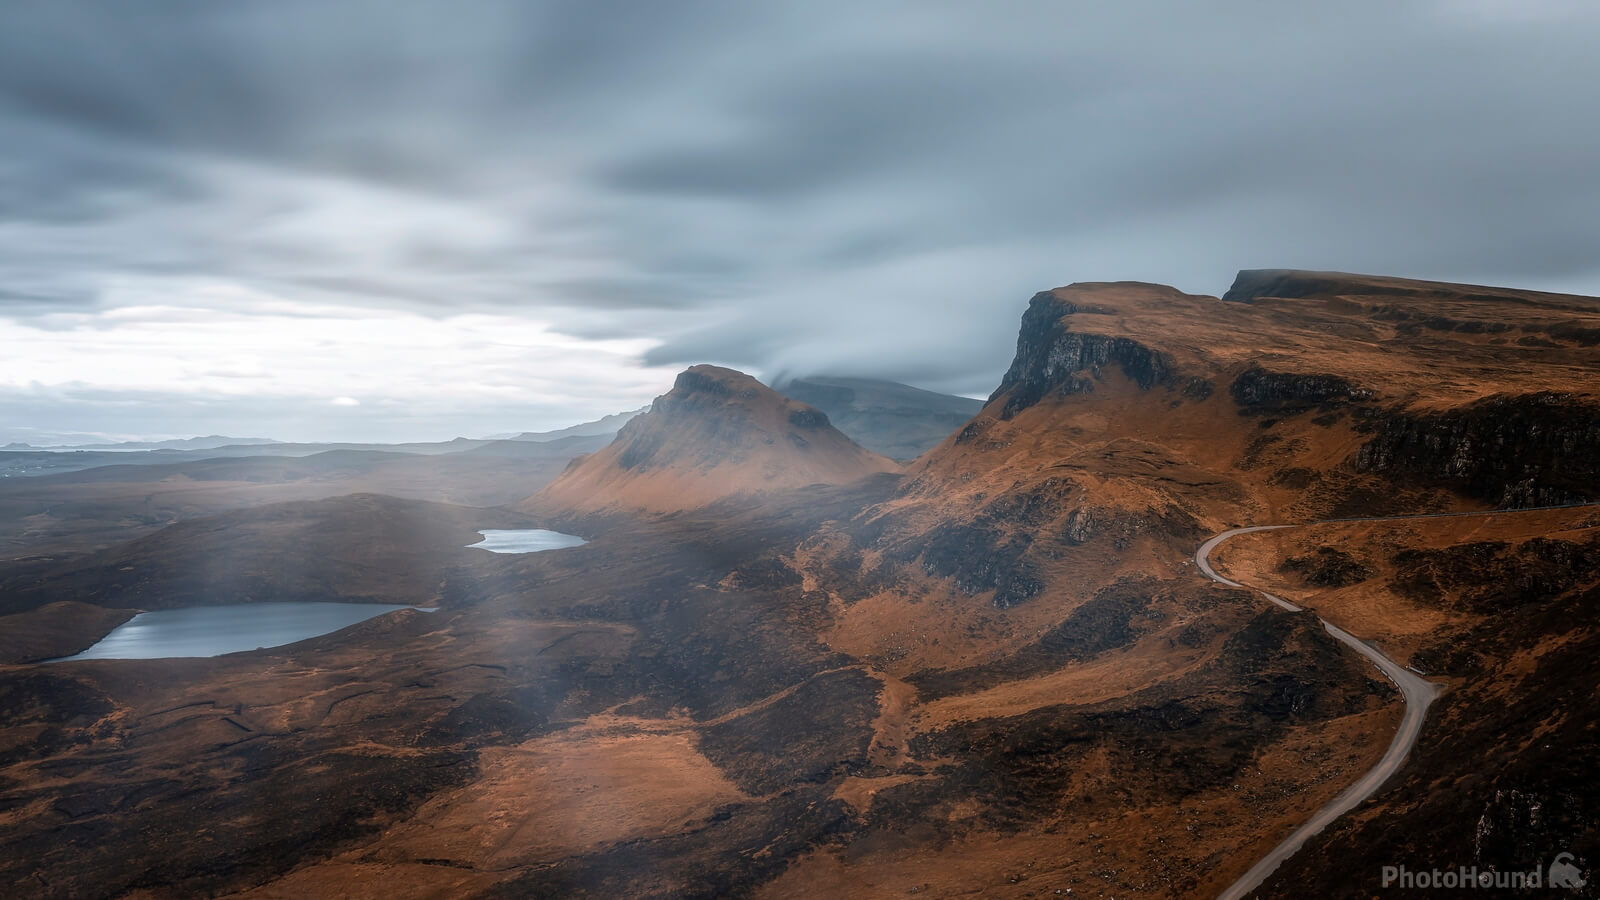 Image of The Quiraing by Doug Stratton